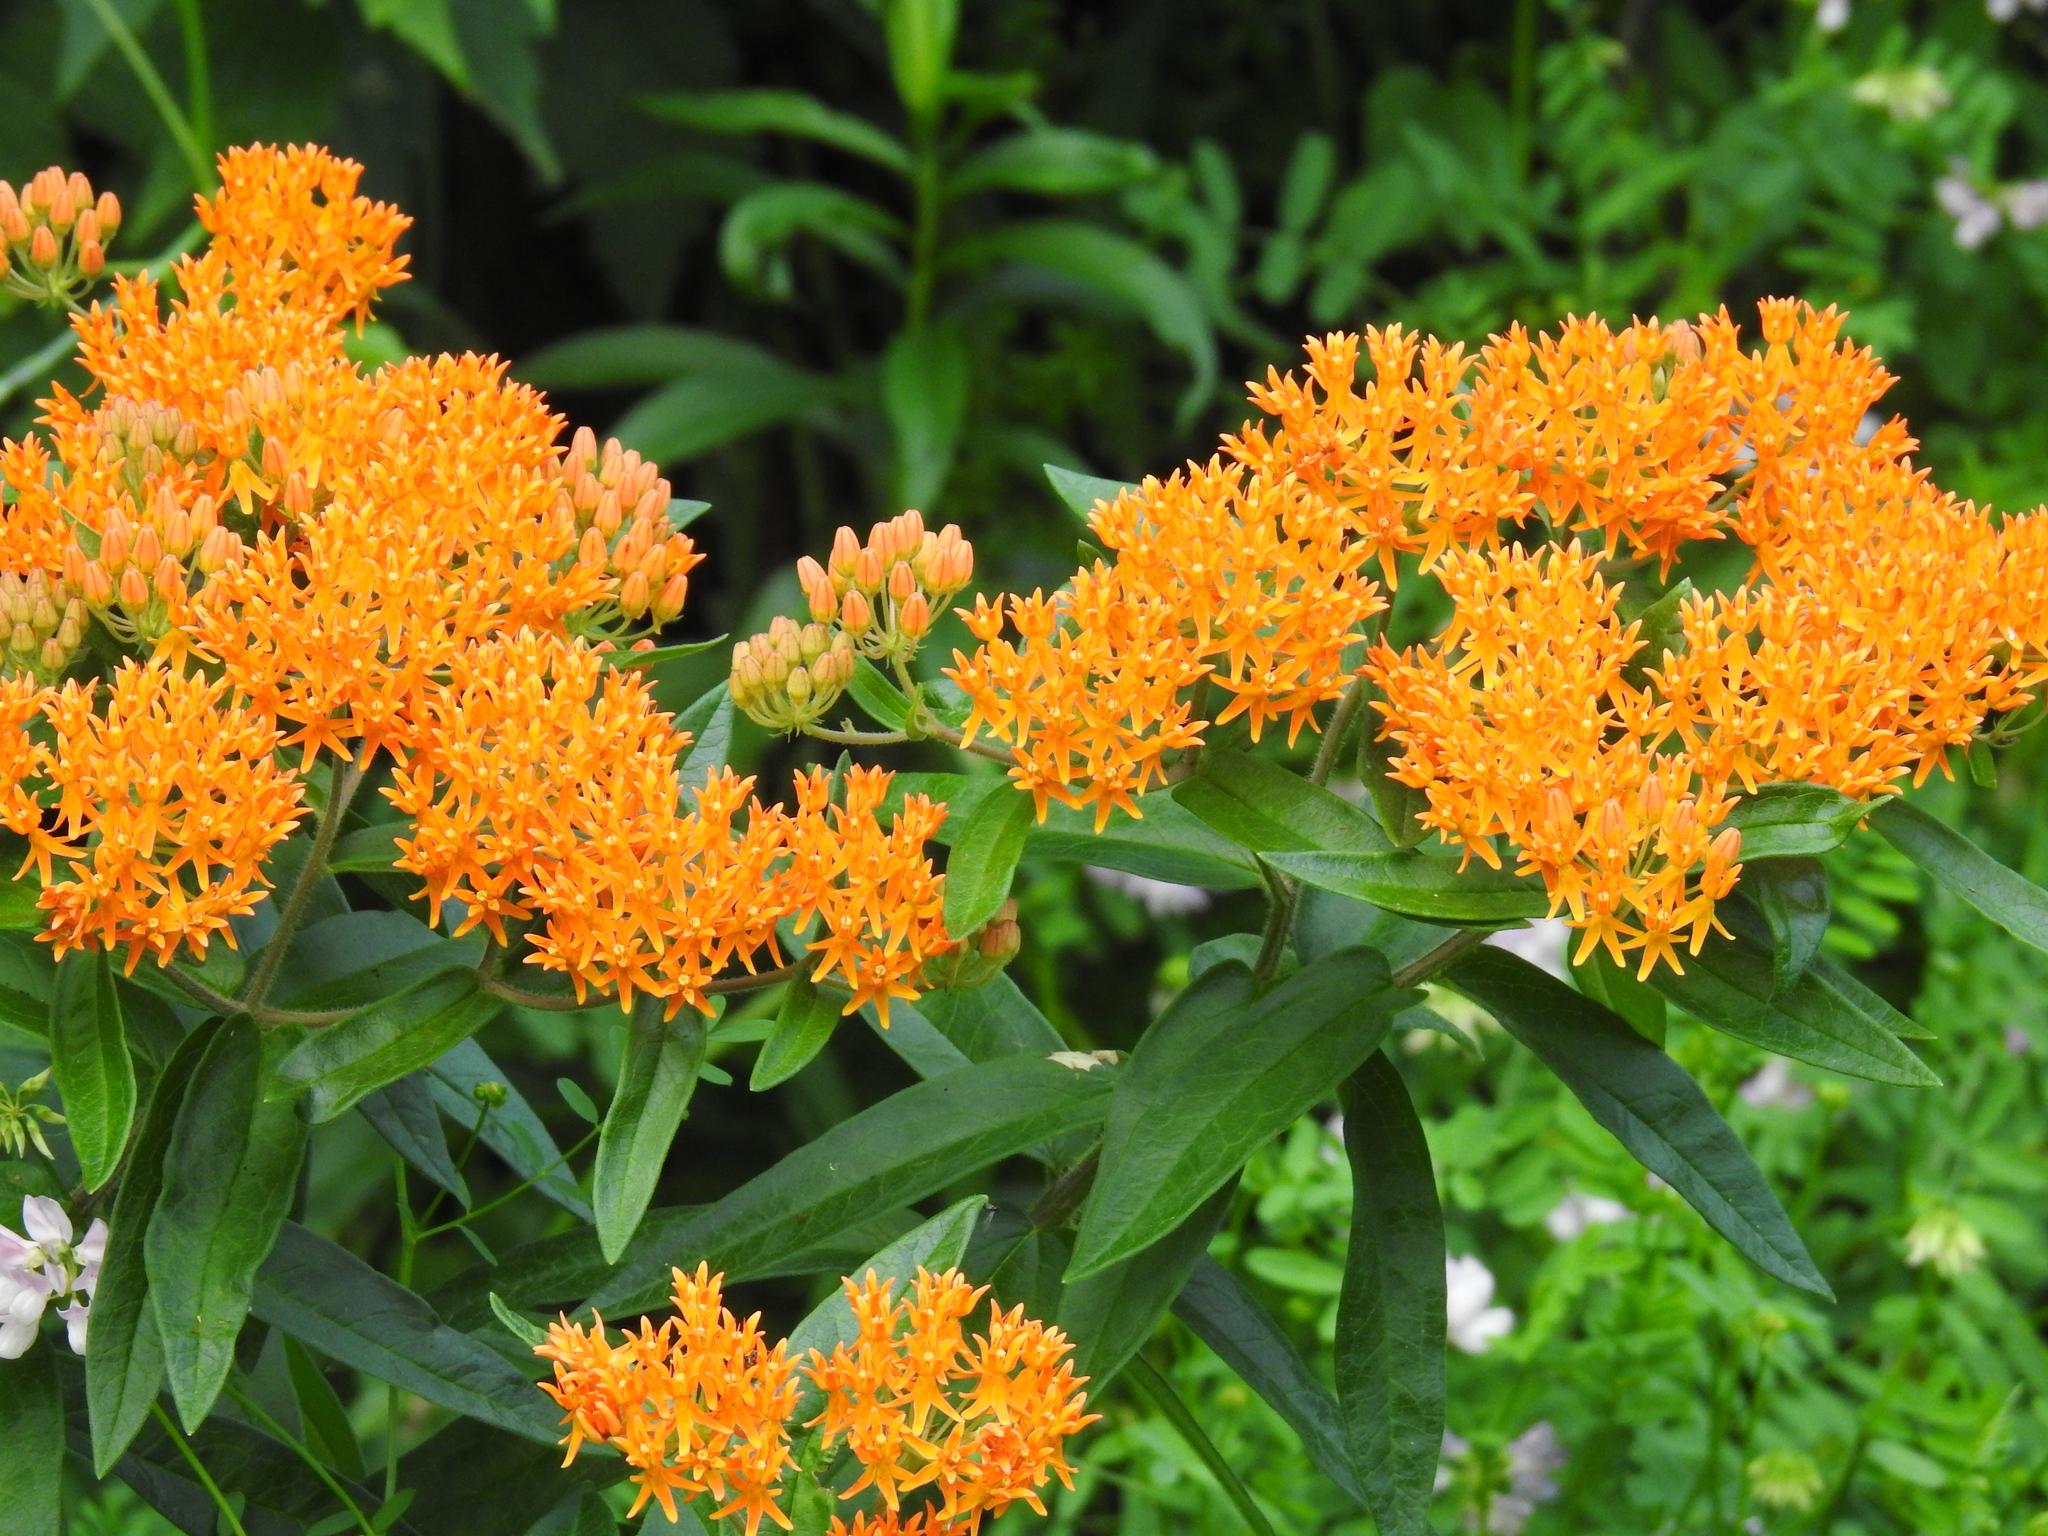 Asclepias 'Tuberosa' - Butterfly Weed from Leo Berbee Bulb Company